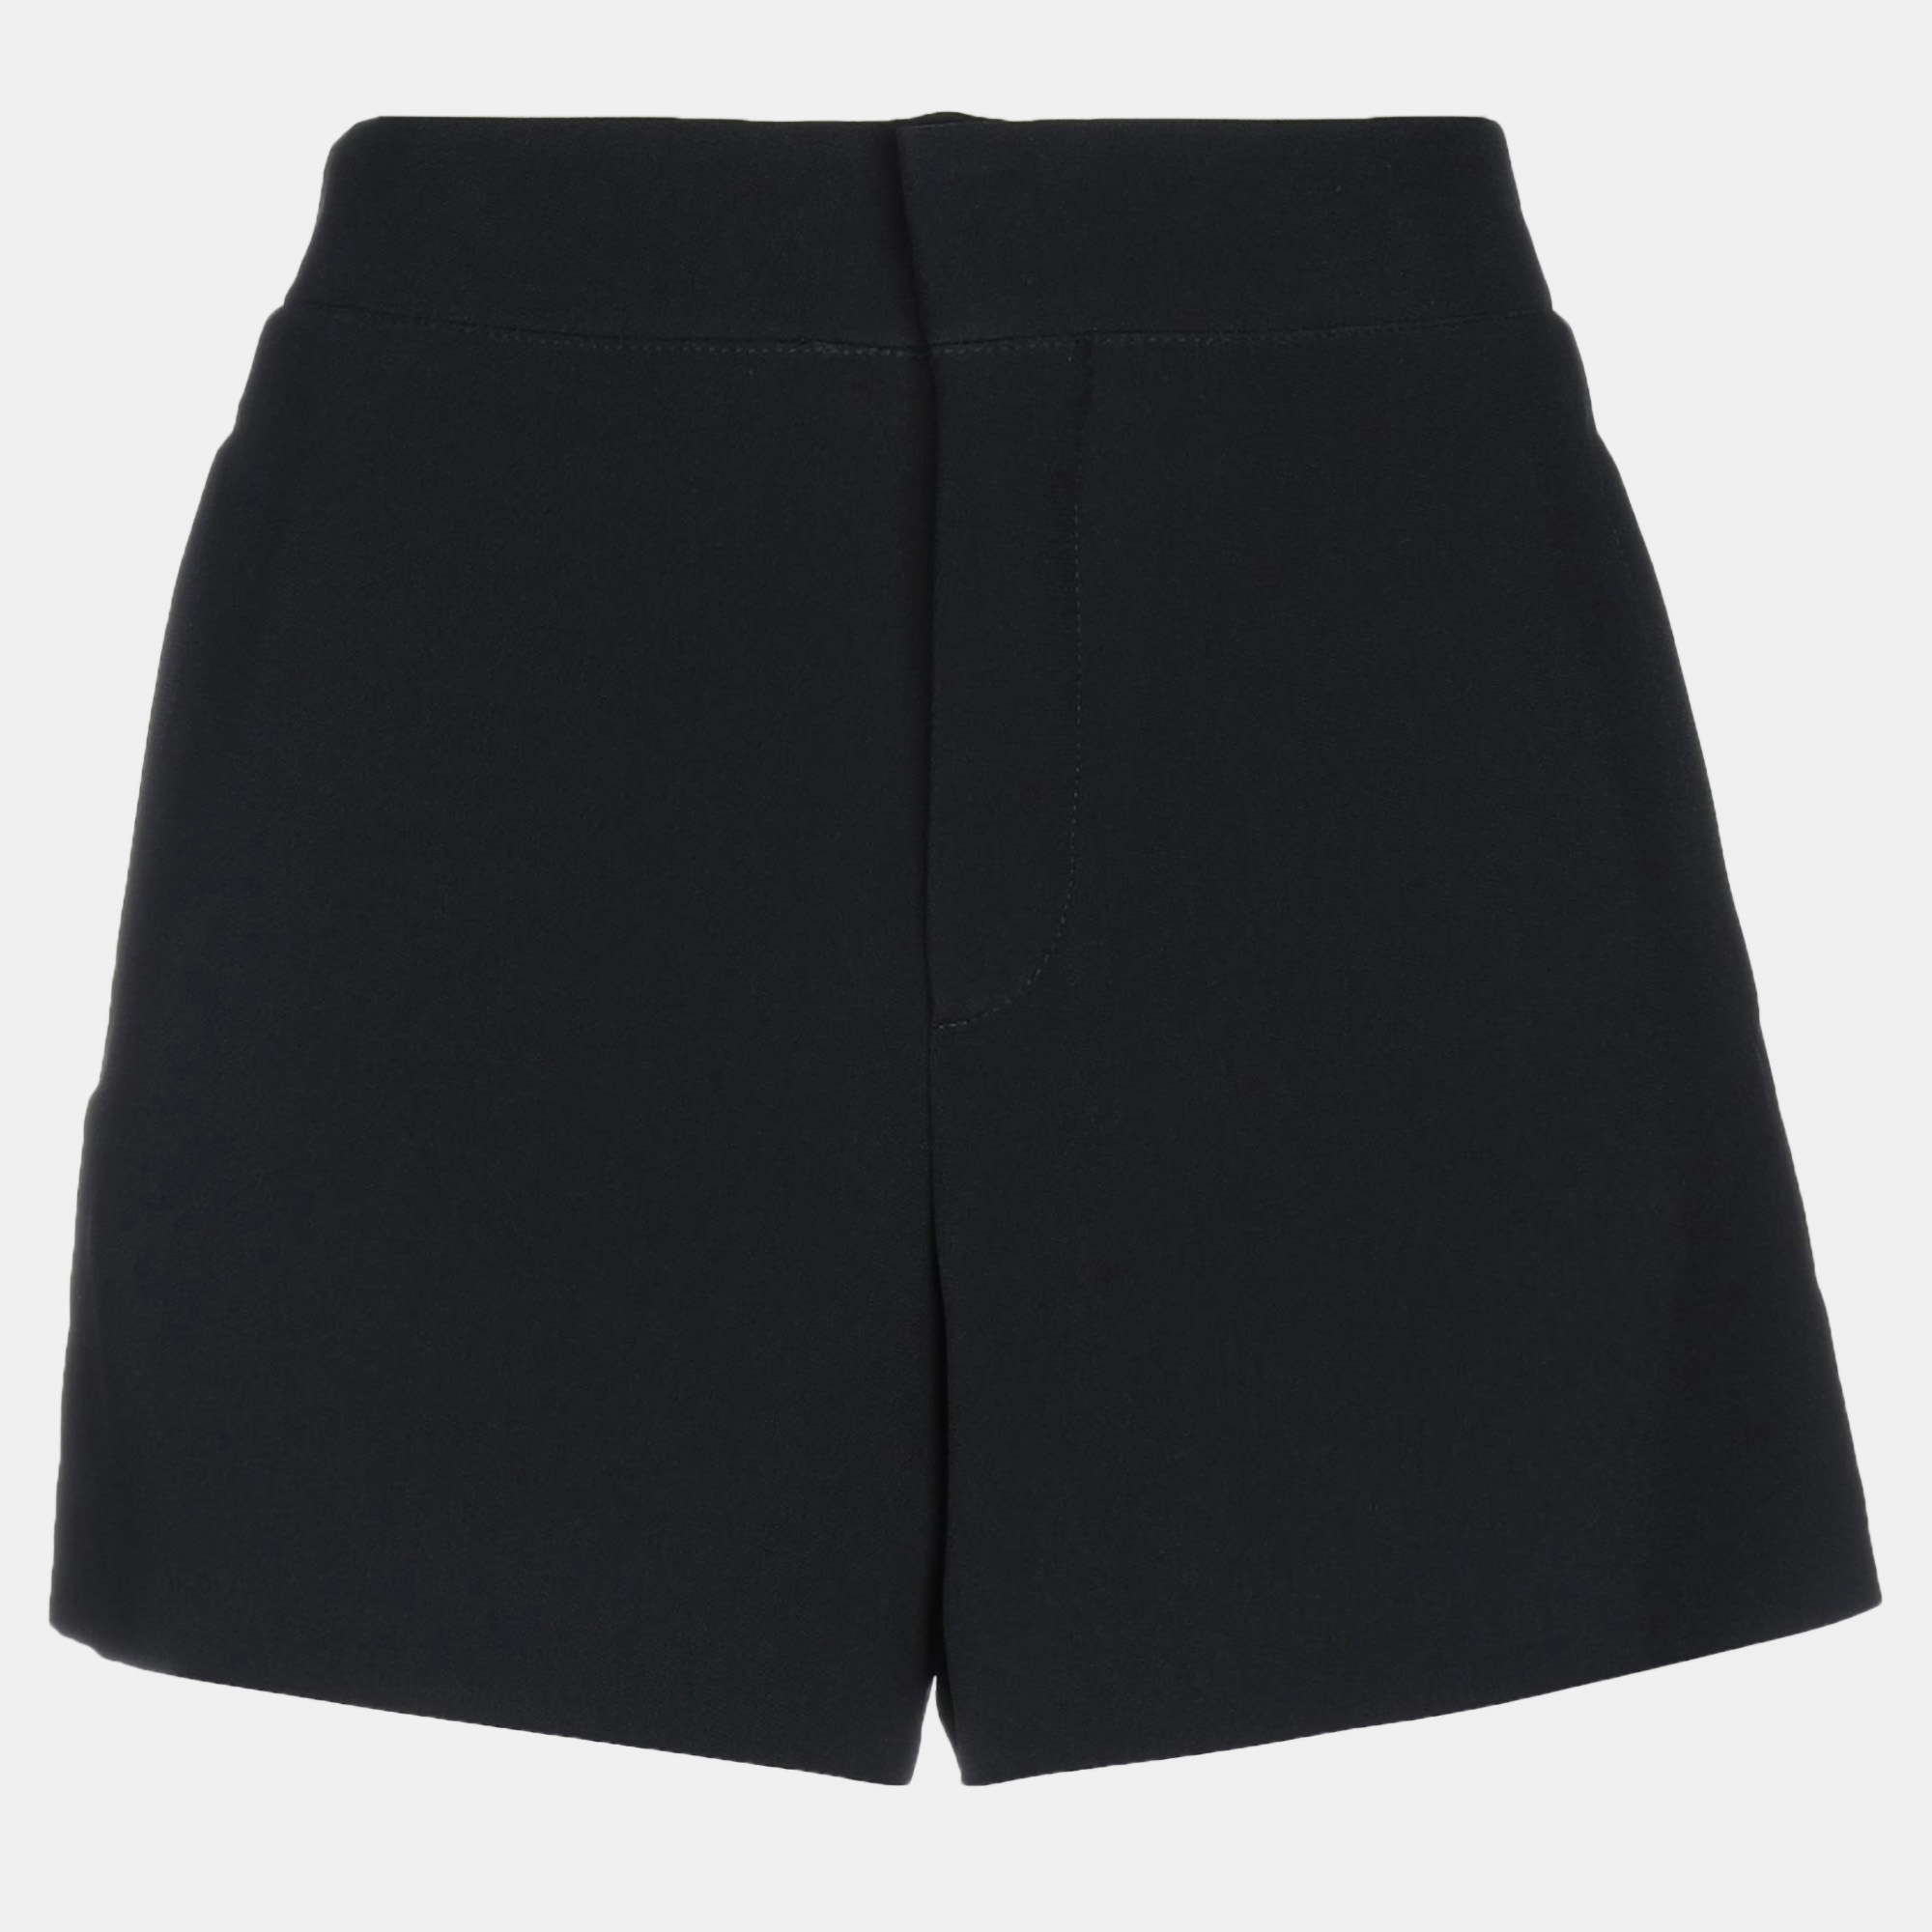 Elegance meets beautiful tailoring in these designer shorts. Crafted from the finest fabrics they offer a flattering fit and all day comfort. Youll love styling them.